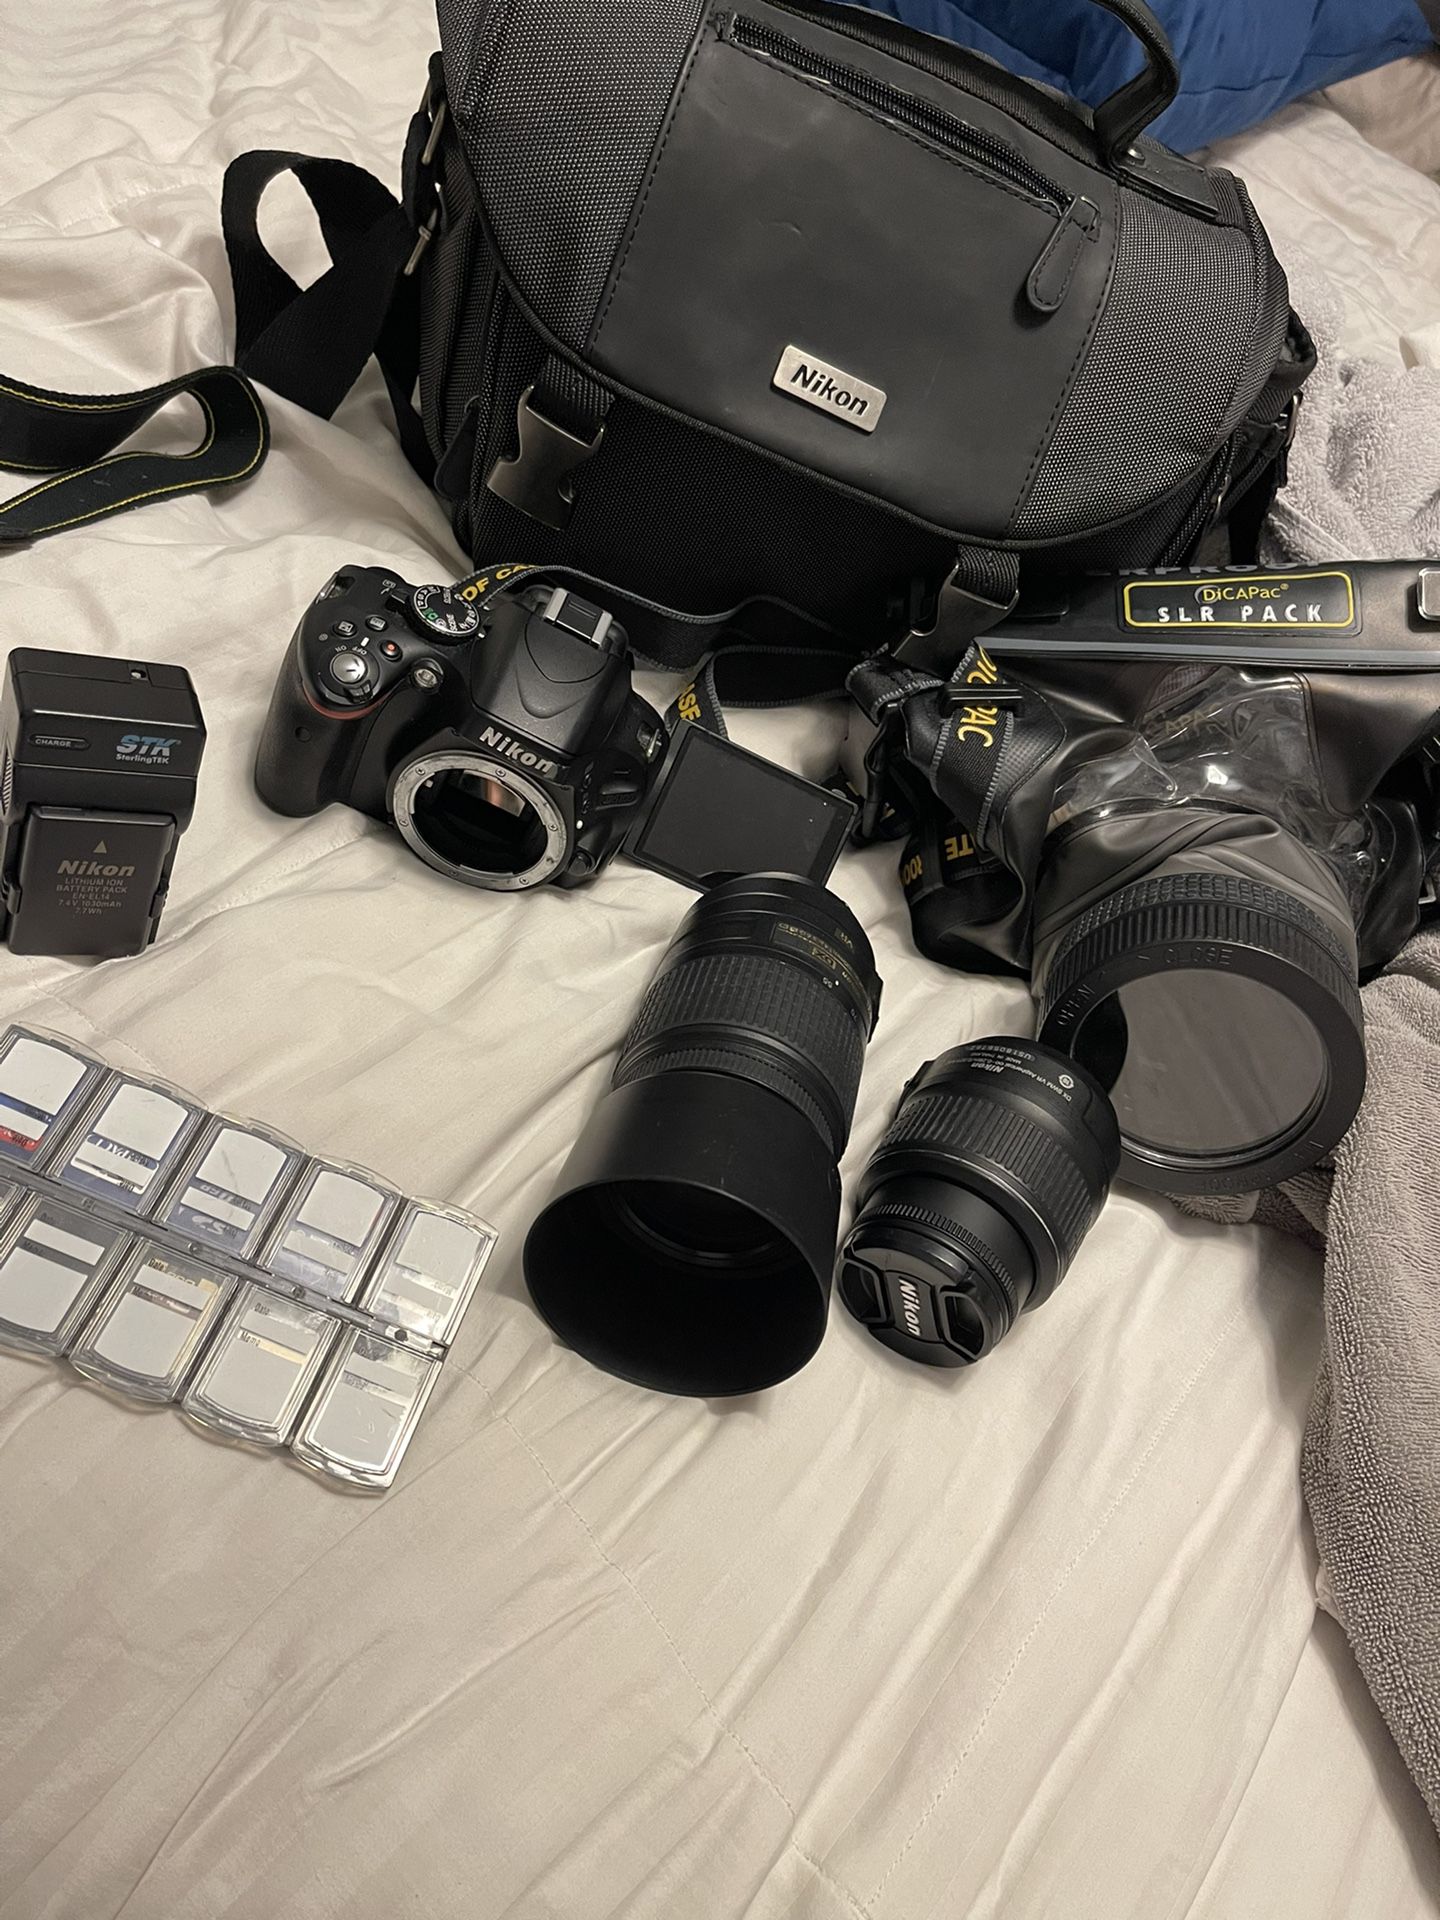 Nikon D5100 , 1 LENS  (Sold One Lens Already), Carry Case, Waterproof Dive Case, 10 Sd Cards, Charger 